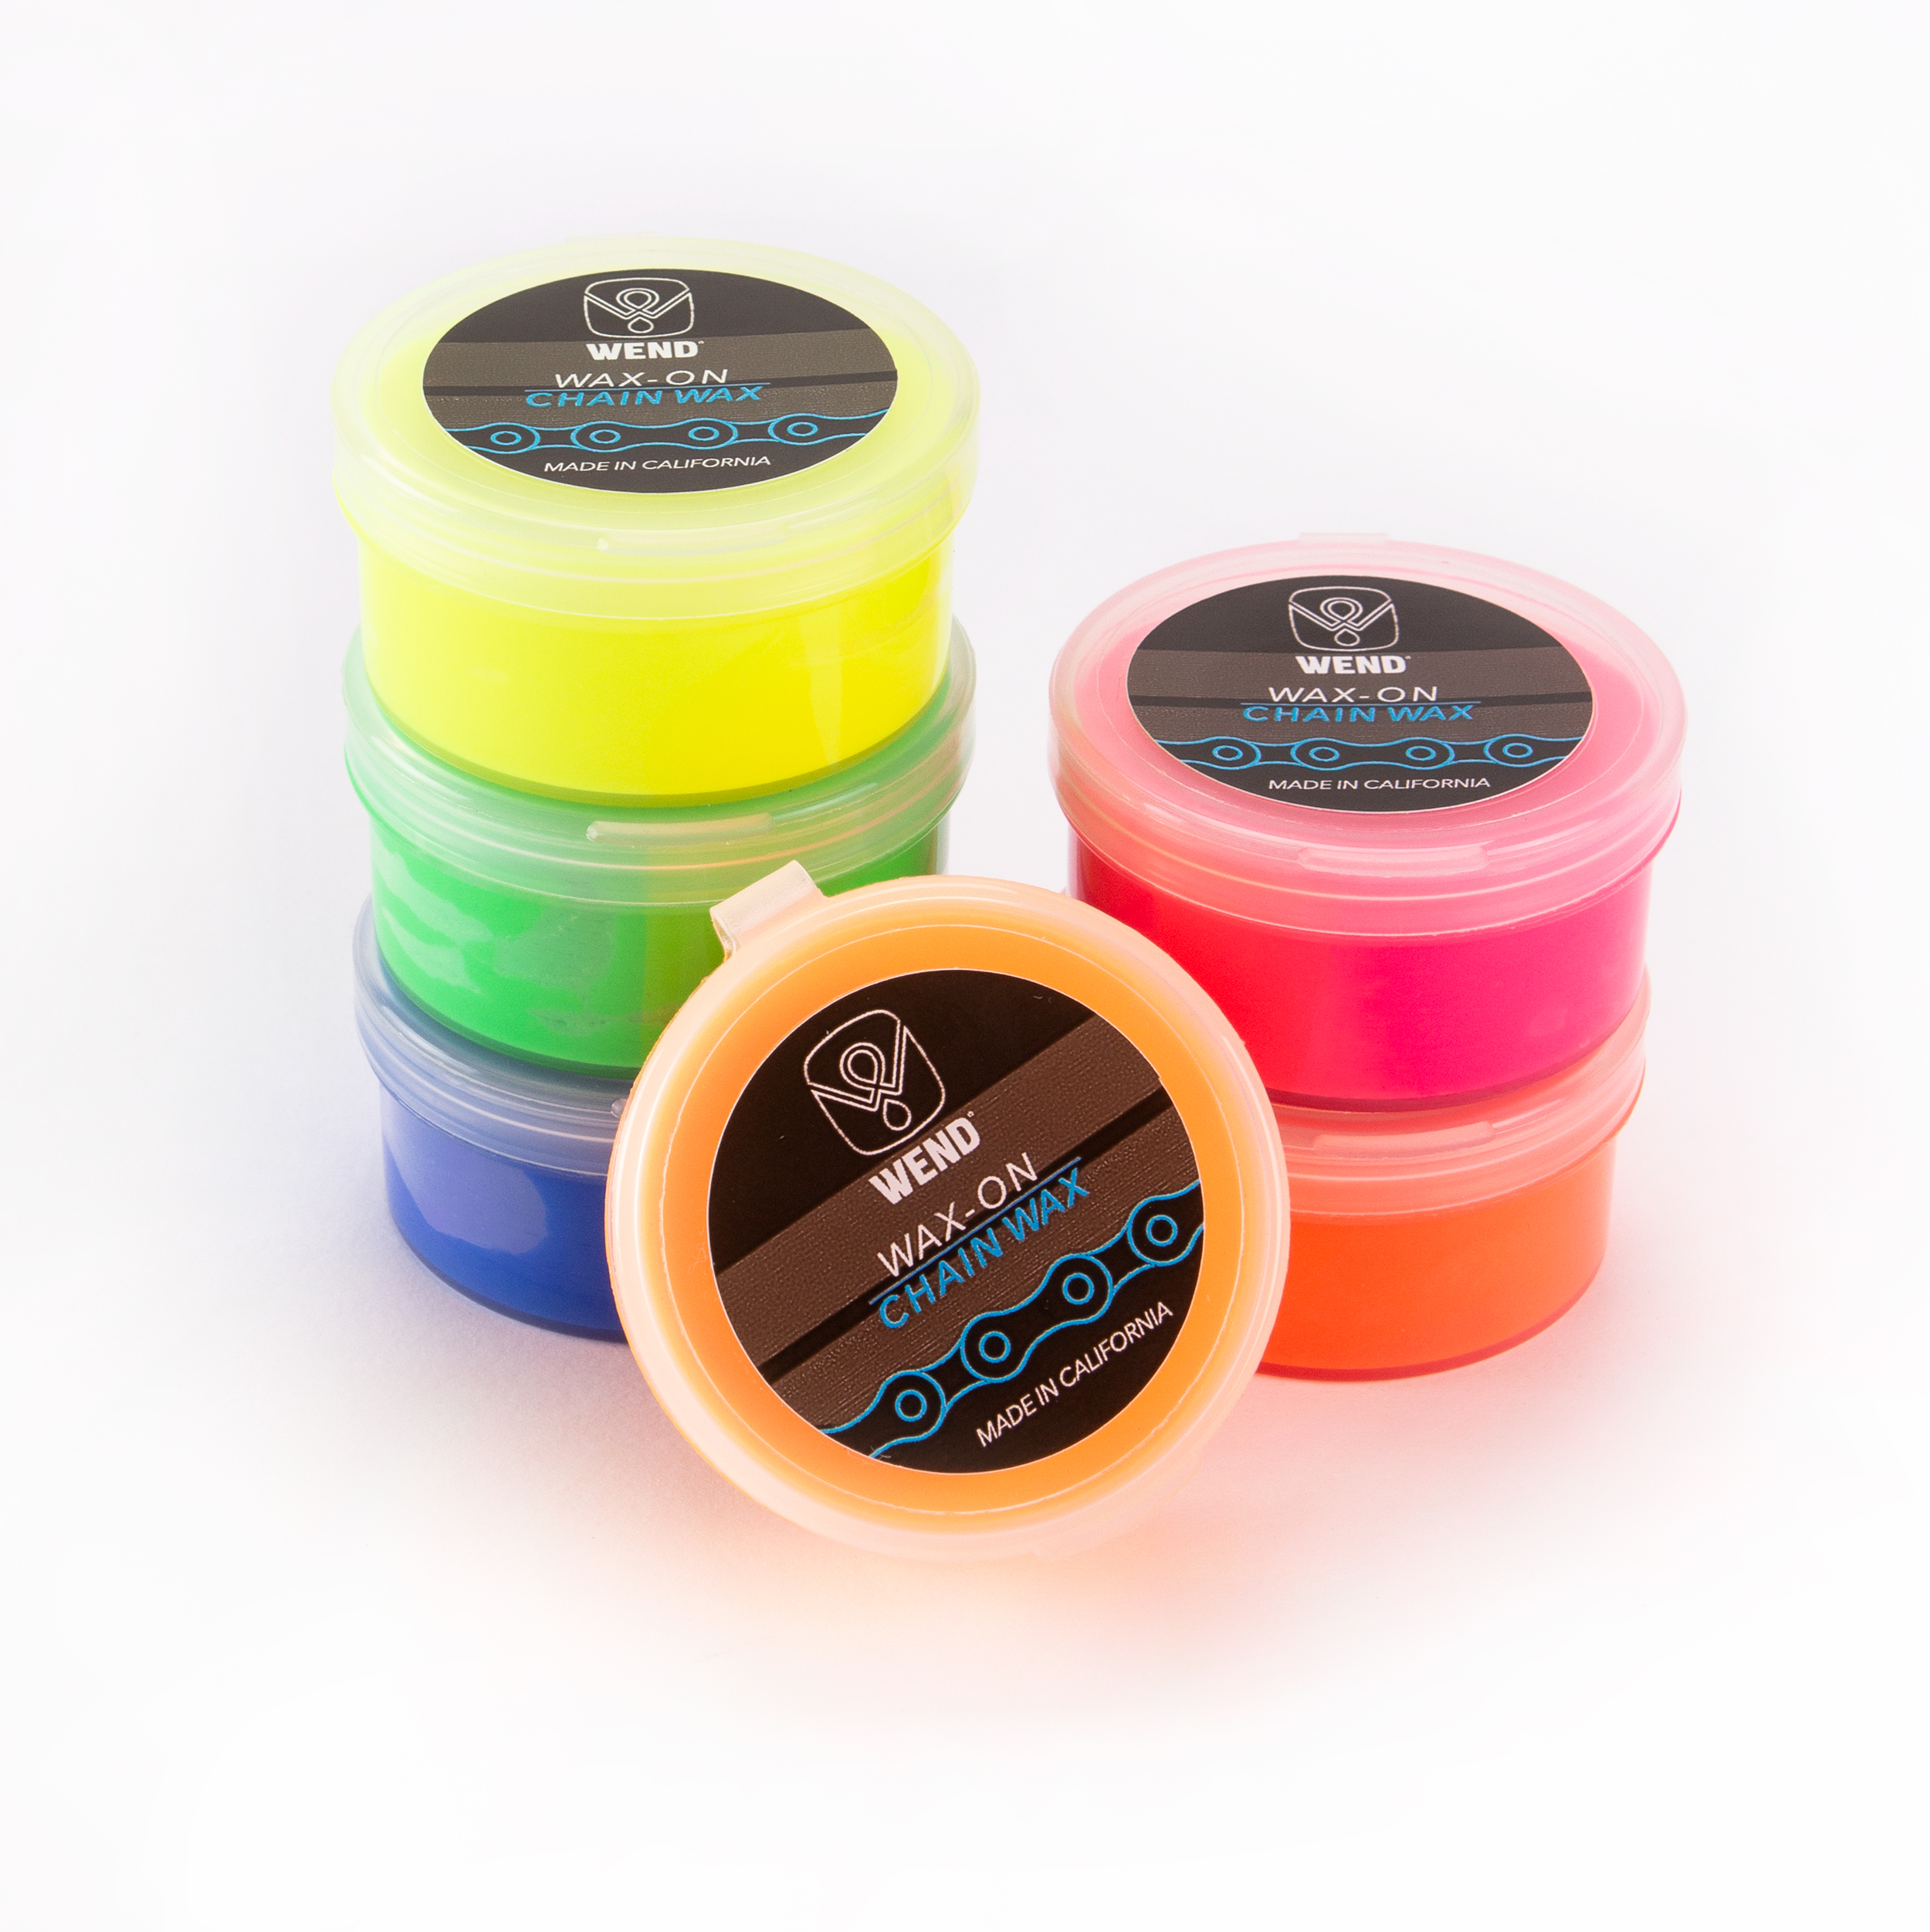 WEND WAX-ON CHAIN LUBE 1OZ POCKET WAX SPECTRUM COLORS 